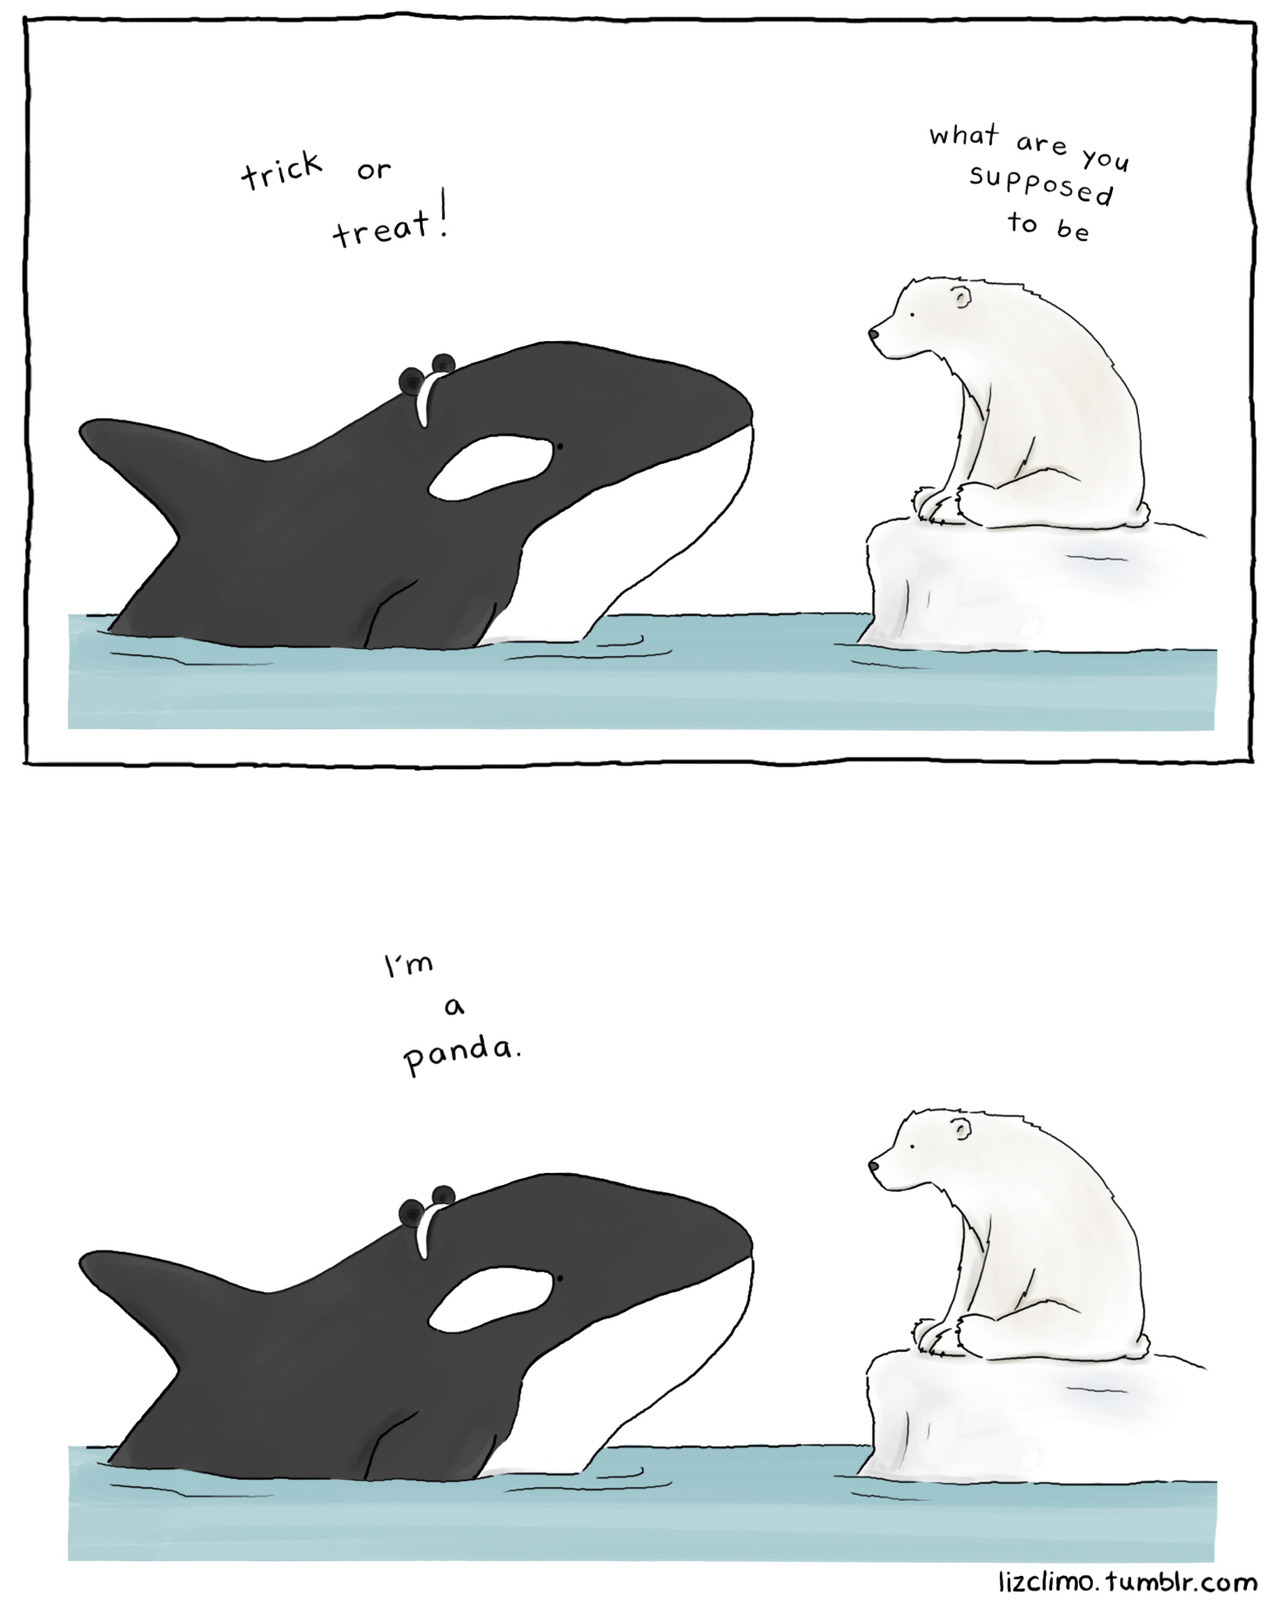 panda whale 
exclusive comic for the fluffington post